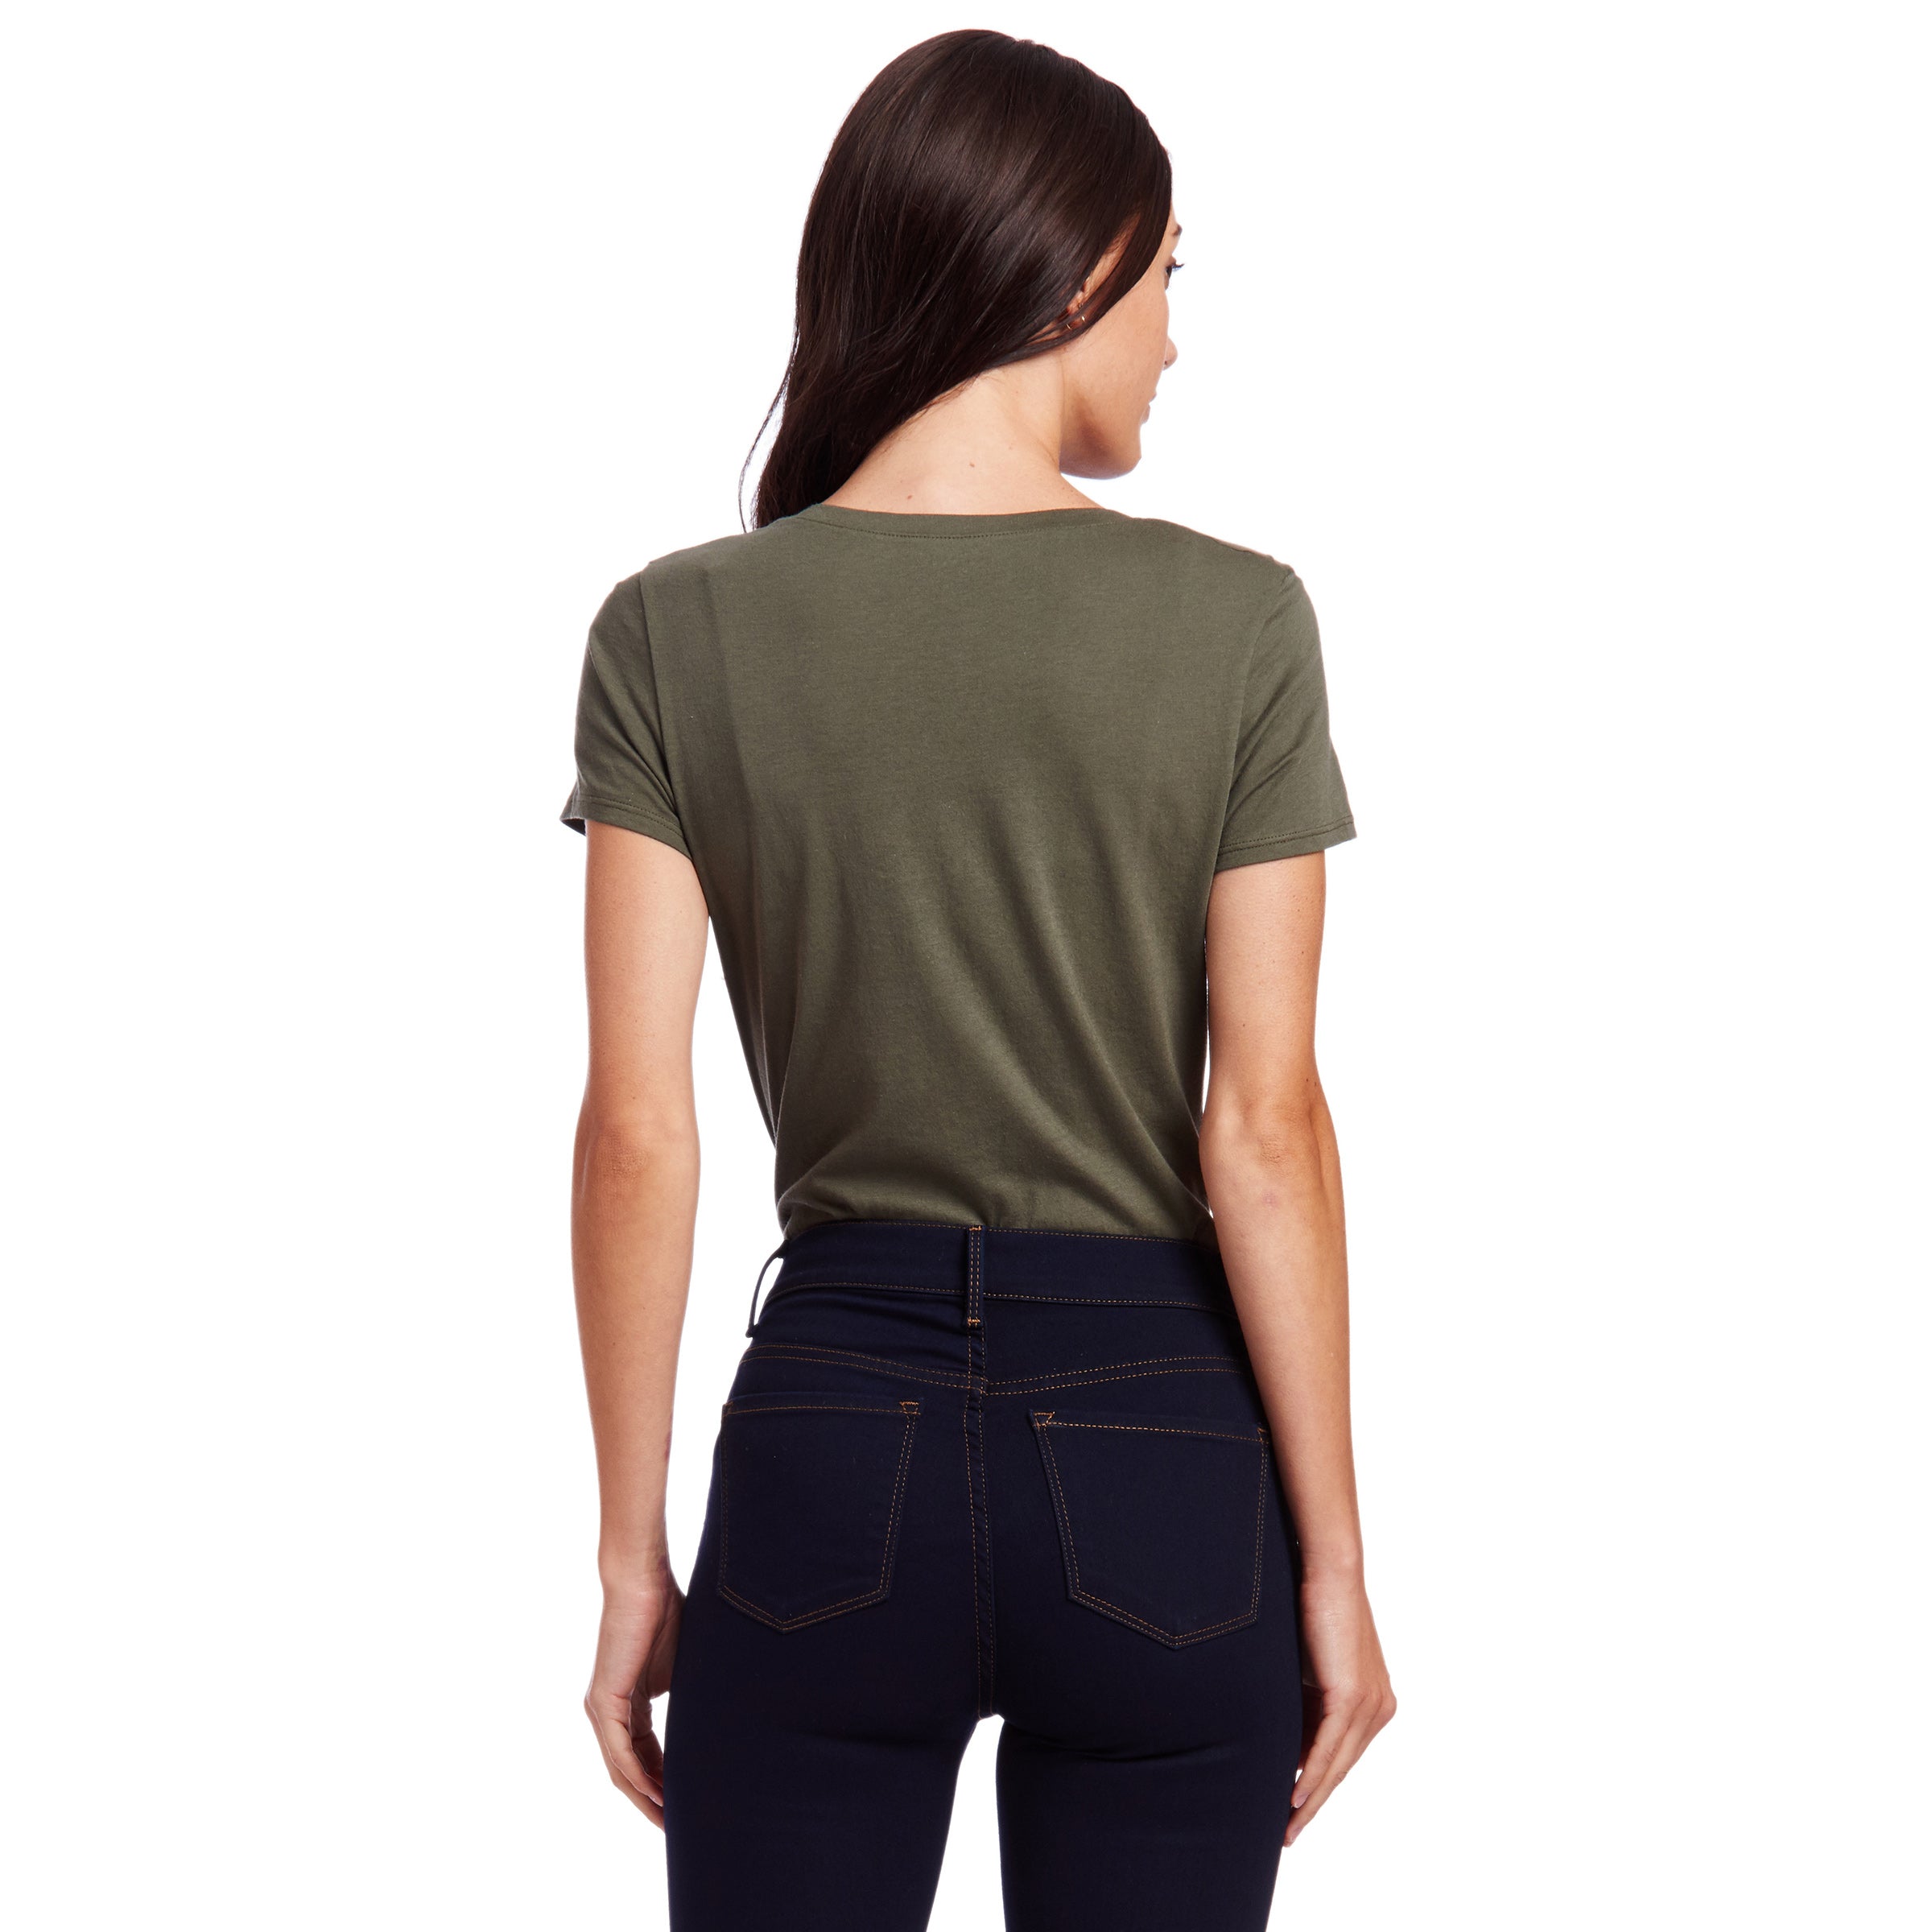 Women wearing Vert Militaire Fitted V-Neck Marcy Tee